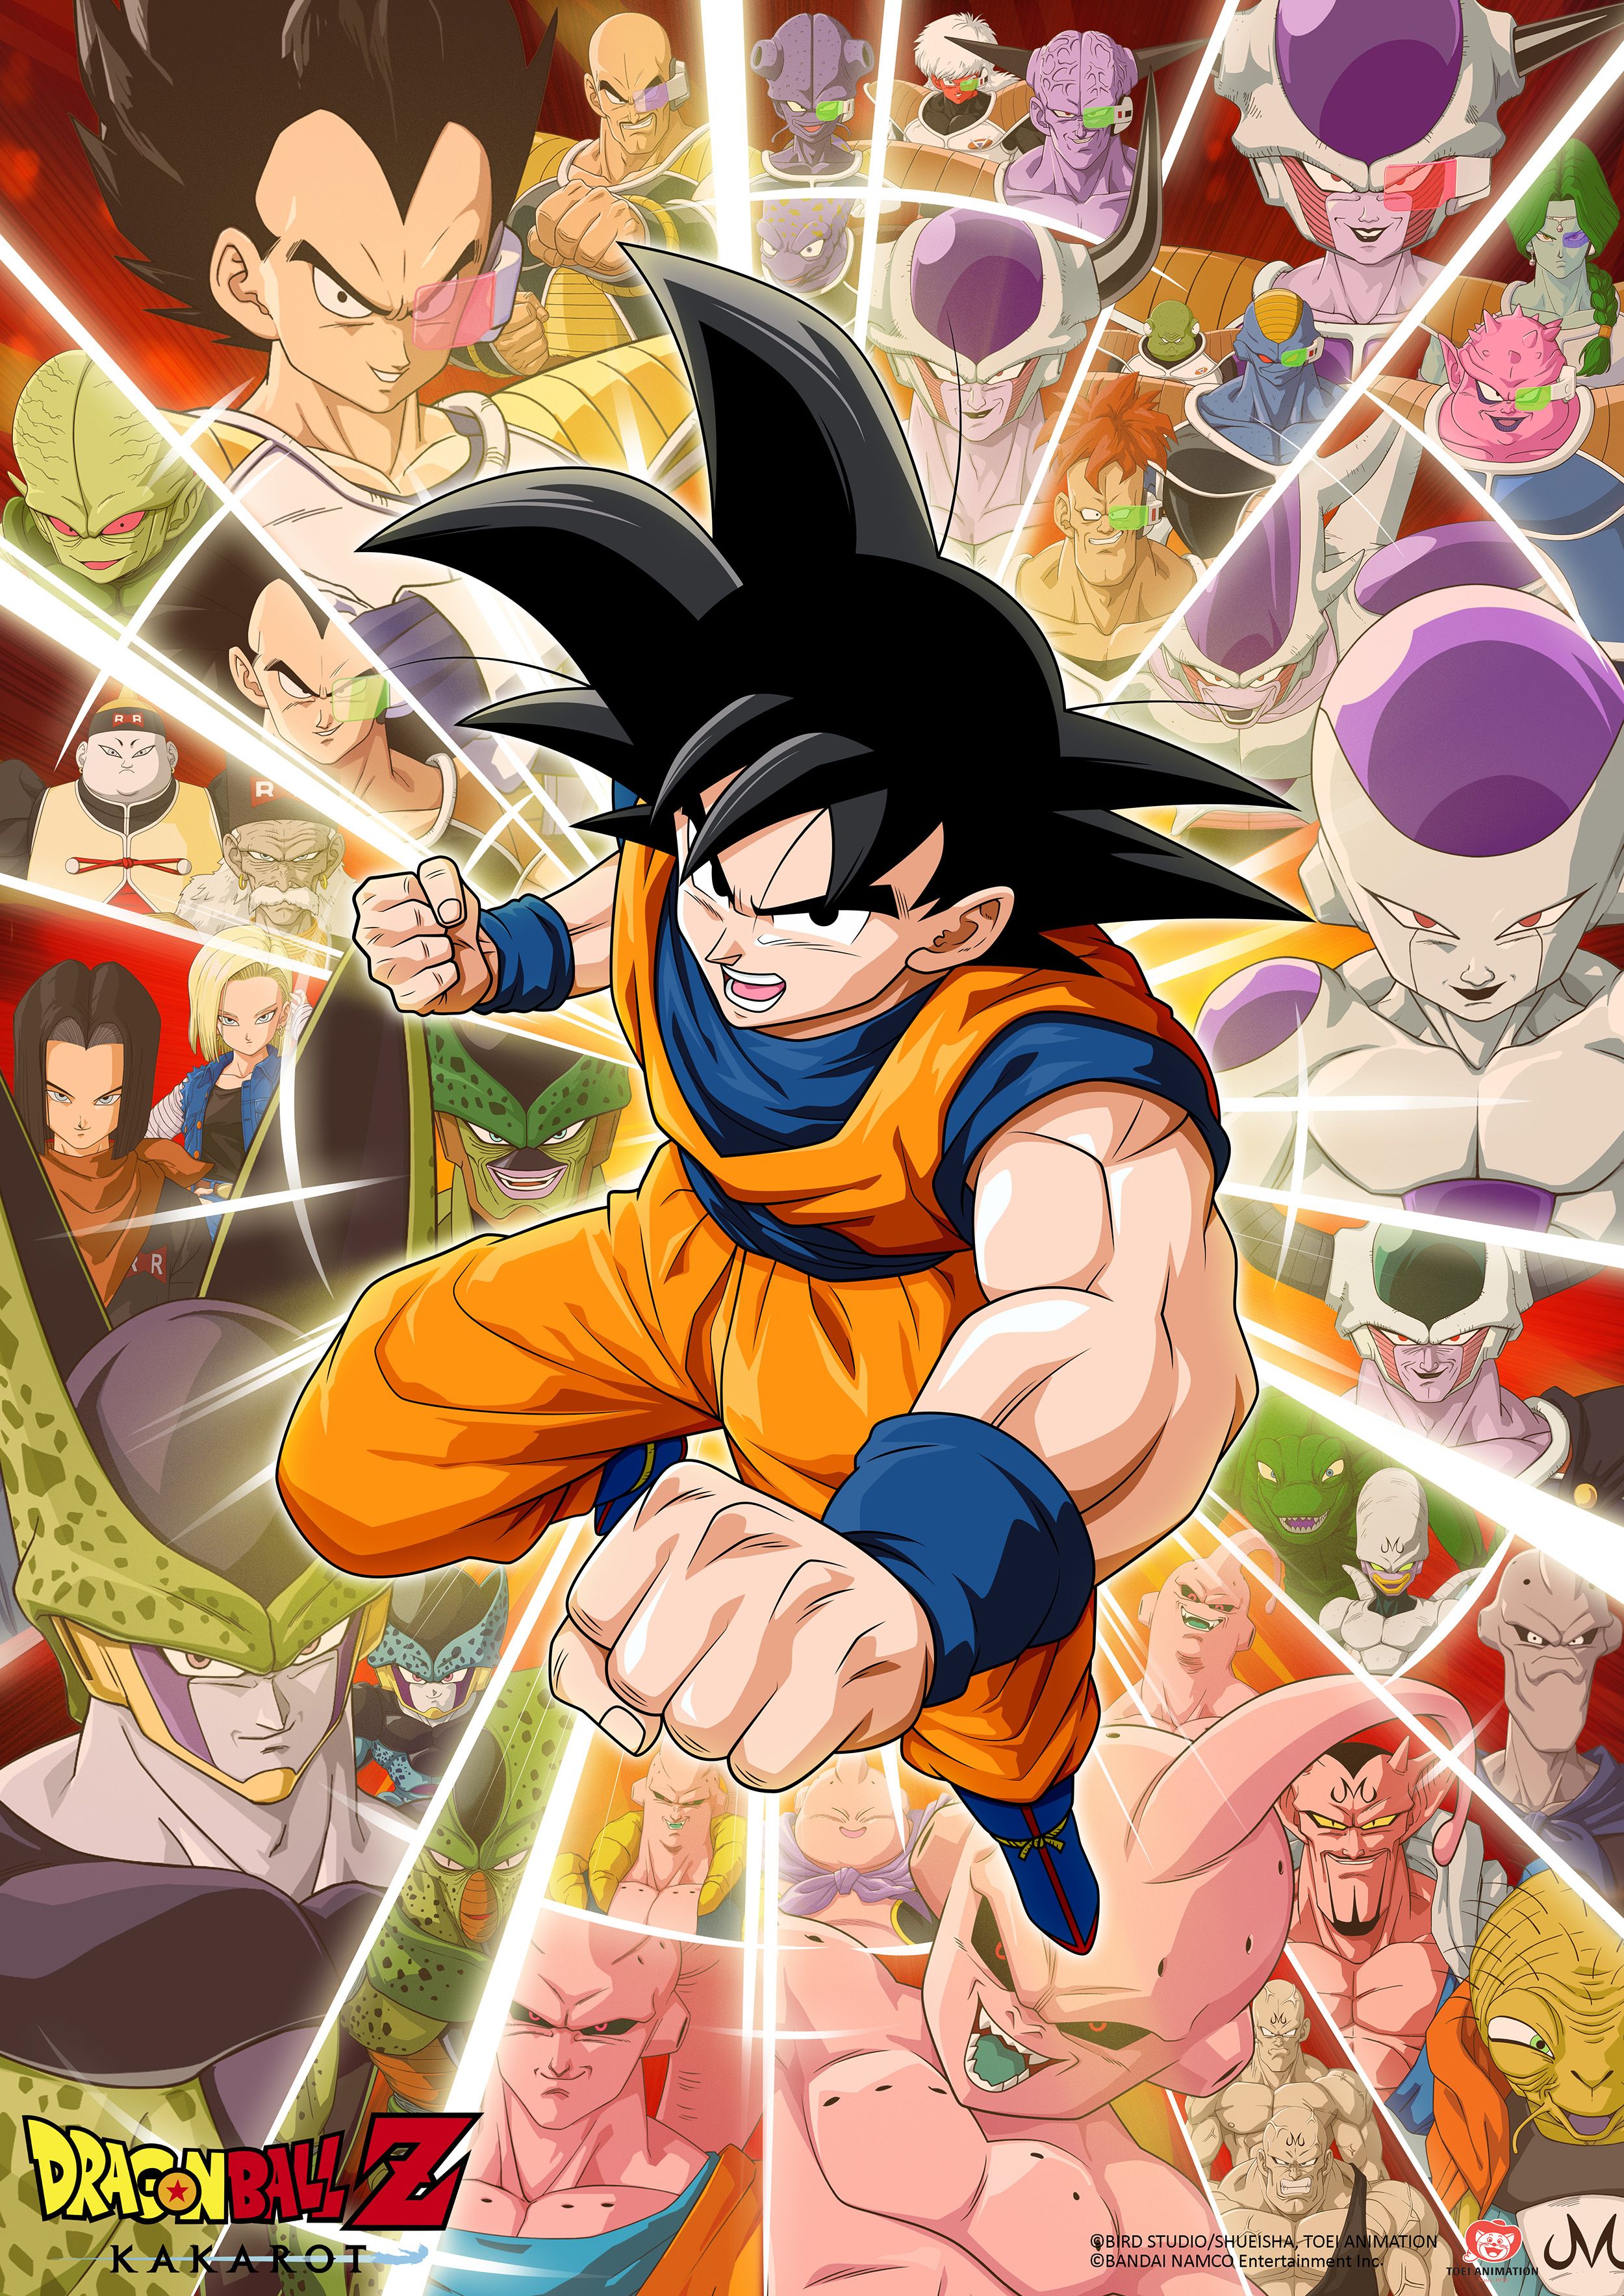 D Ball Z Wallpaper APK Download for Android Free